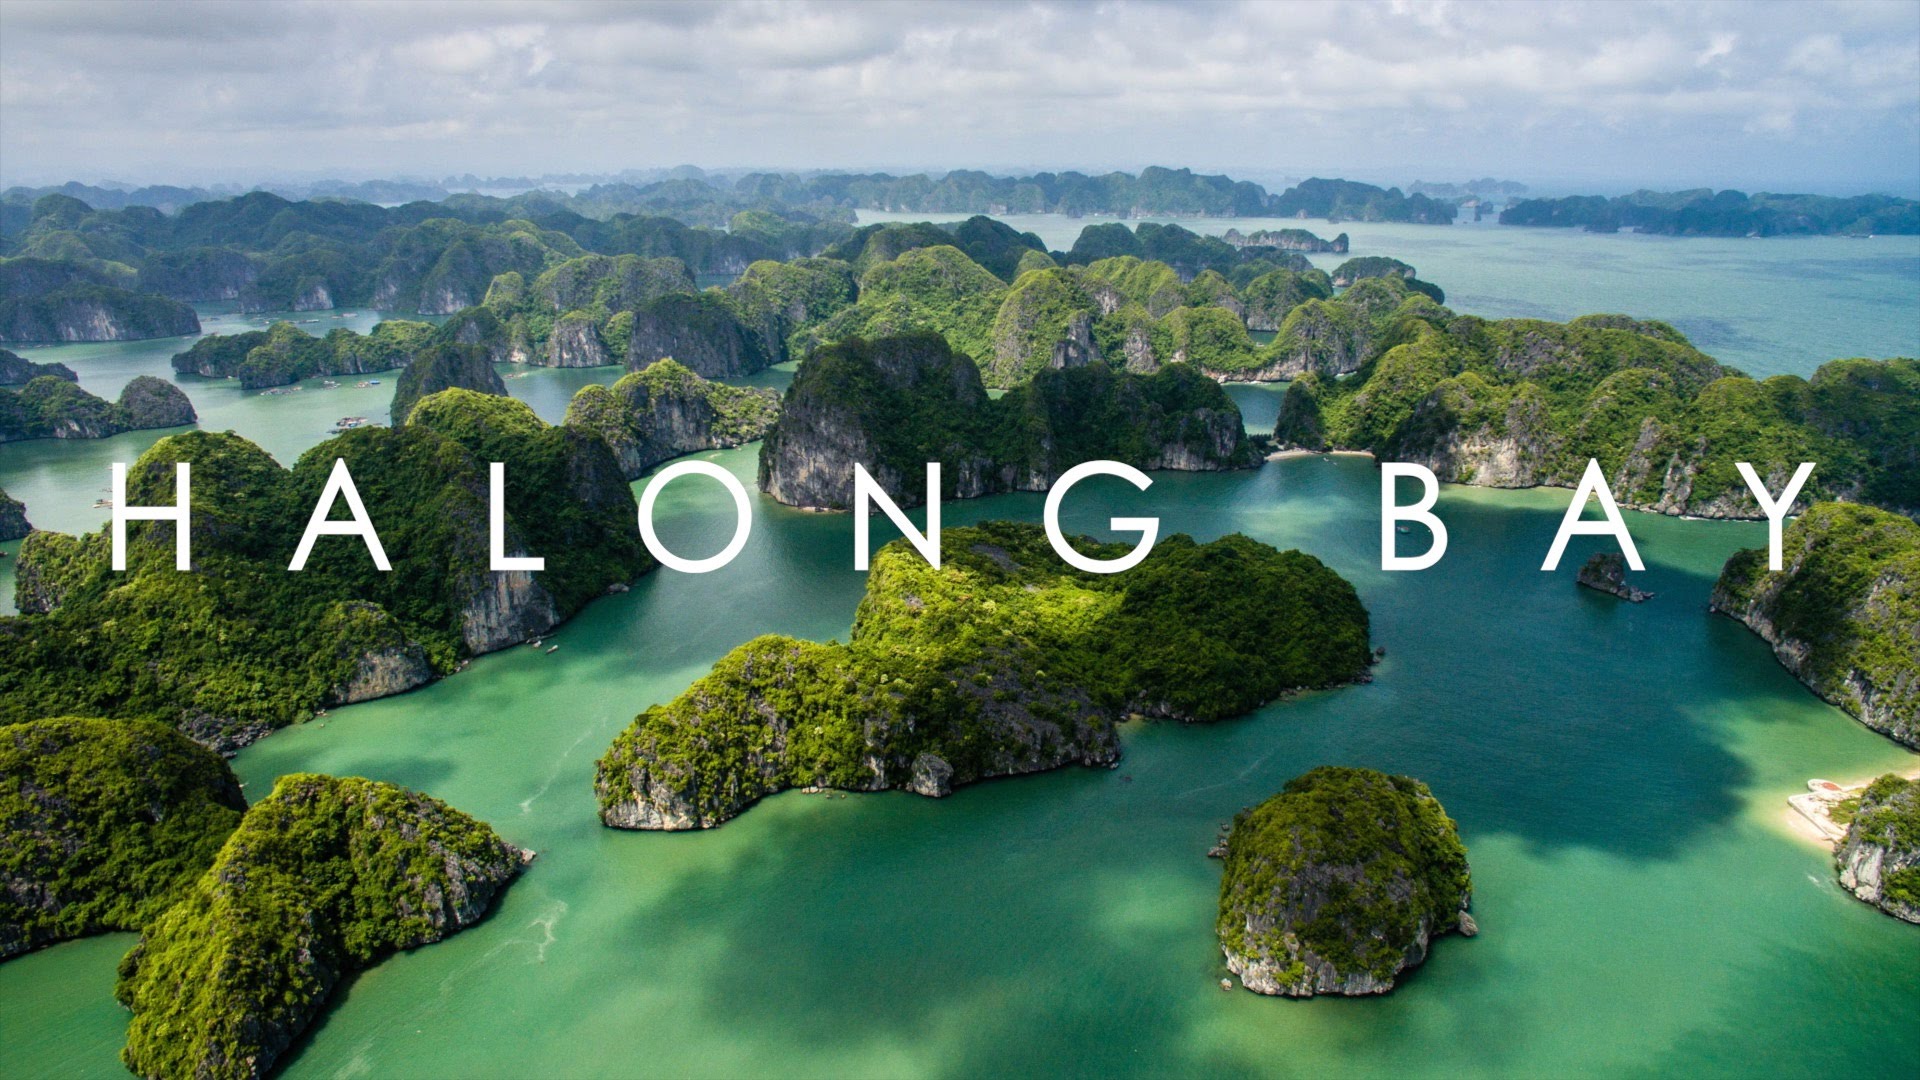 Take your vacation to new heights with a scenic and luxurious cruise through Halong Bay